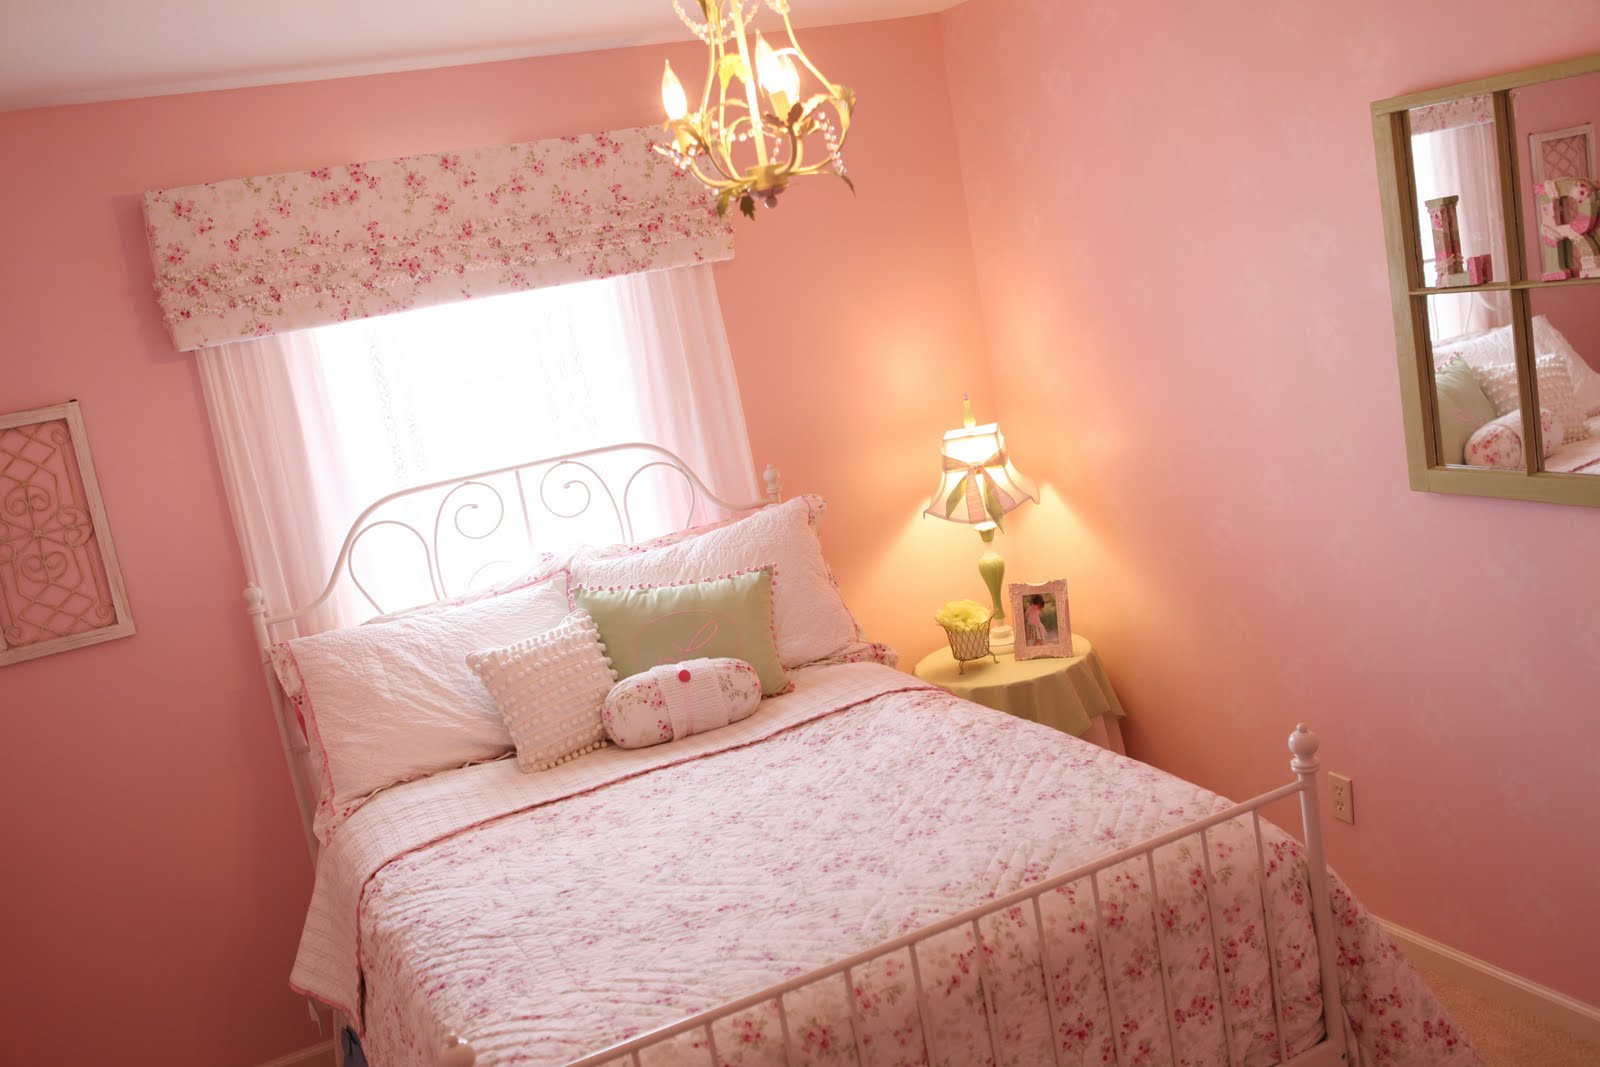 Painting Ideas For Girl Bedroom
 Girls Room Paint Ideas with Feminine Touch Amaza Design